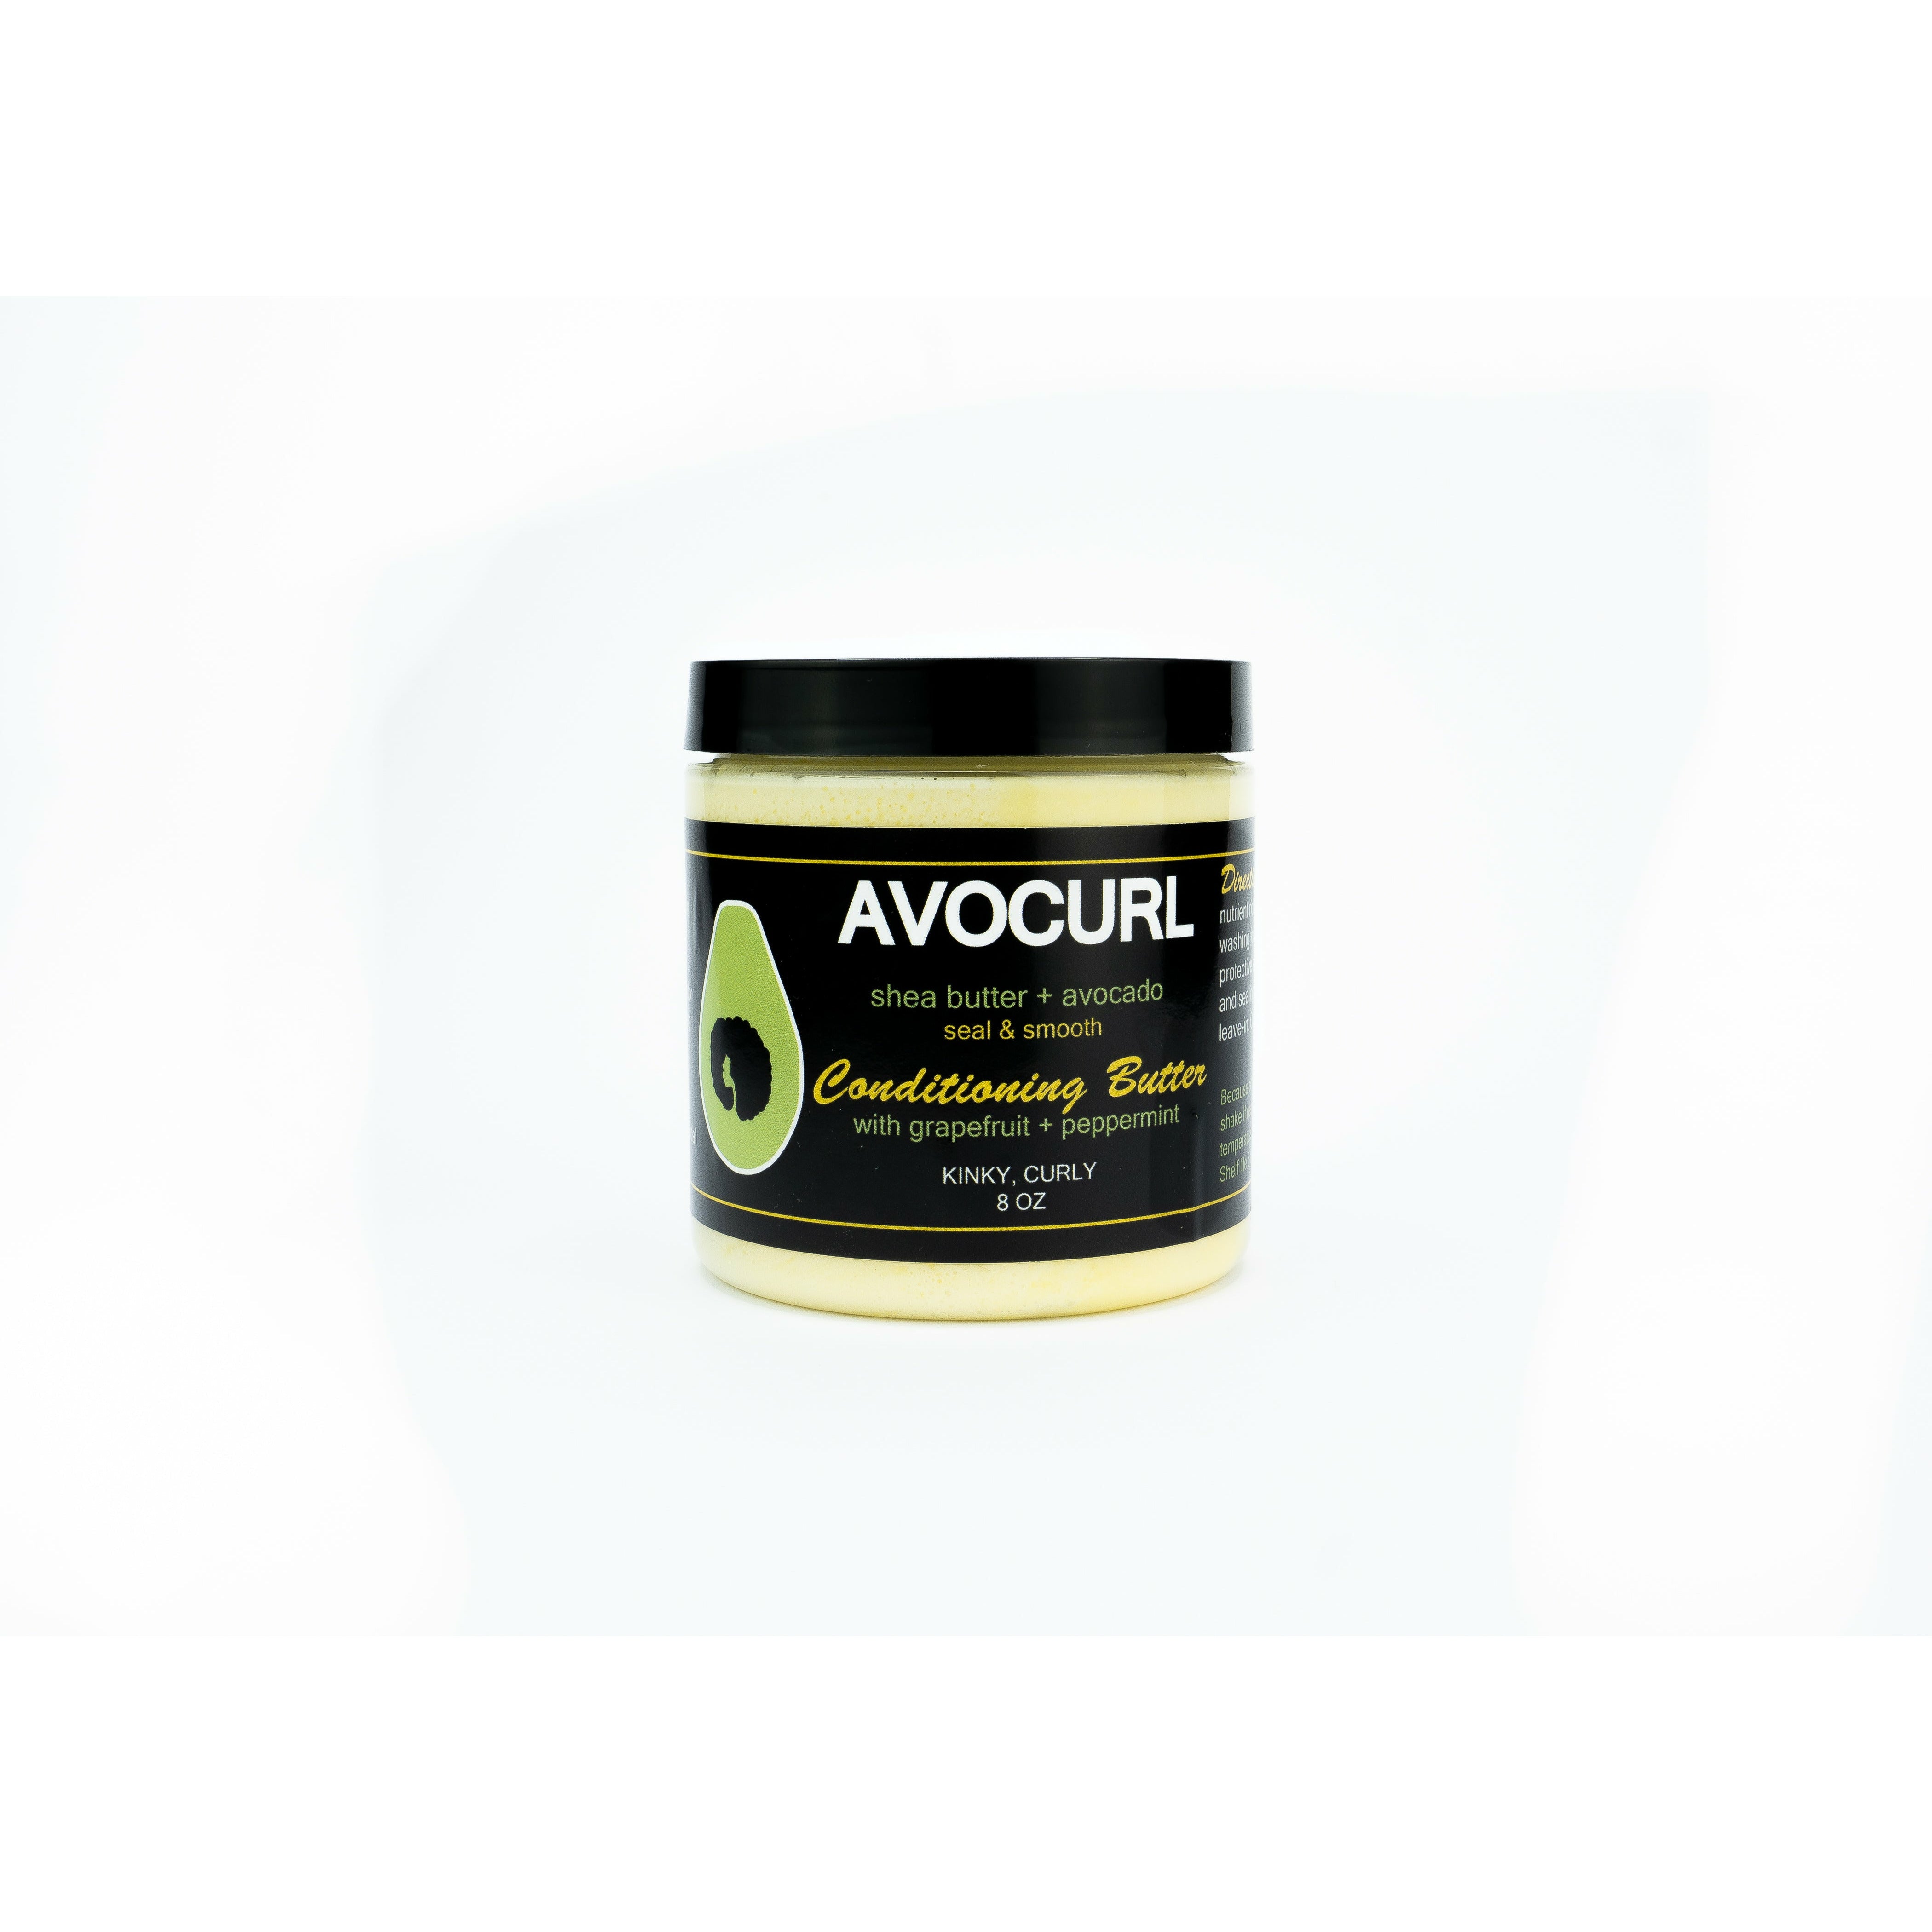 Avocurl Conditioning Butter